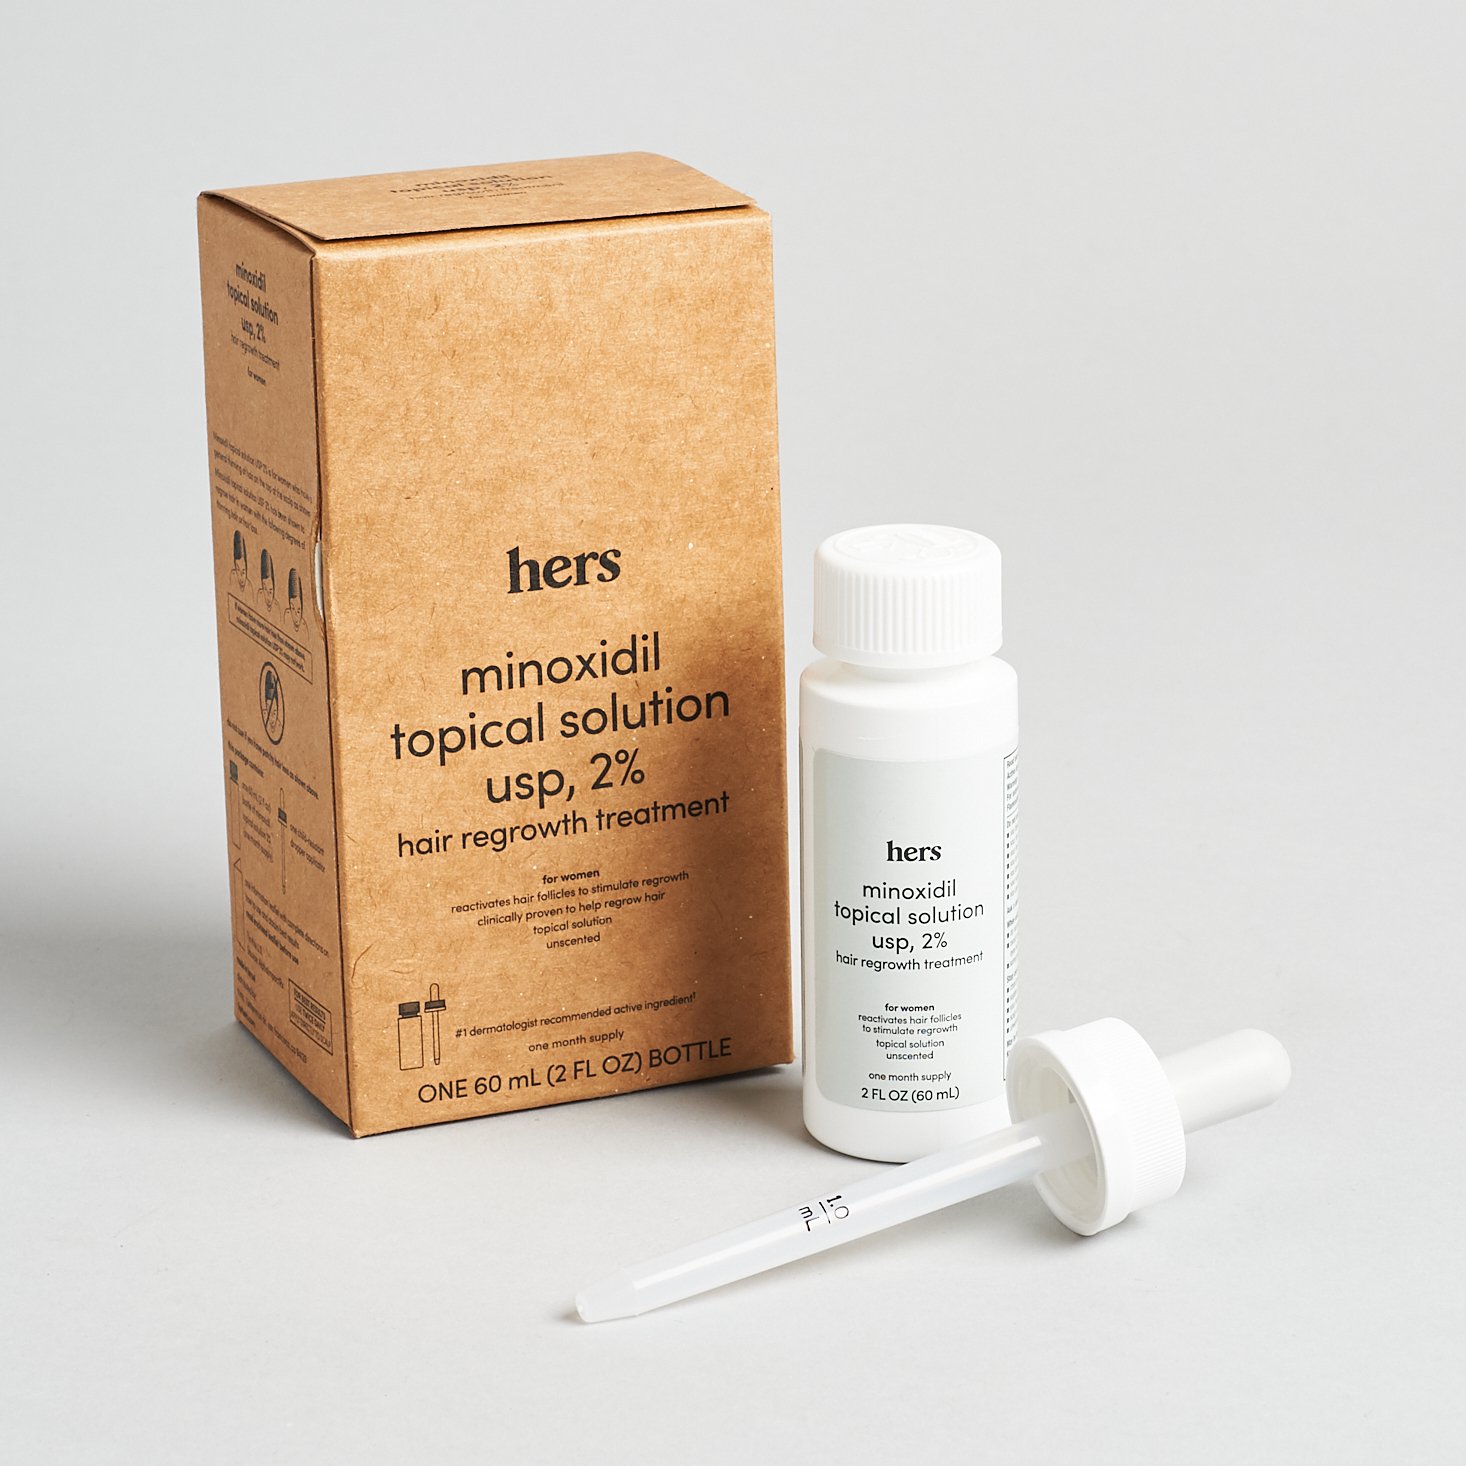 Hers Review: A Hair Loss Solution for Women?